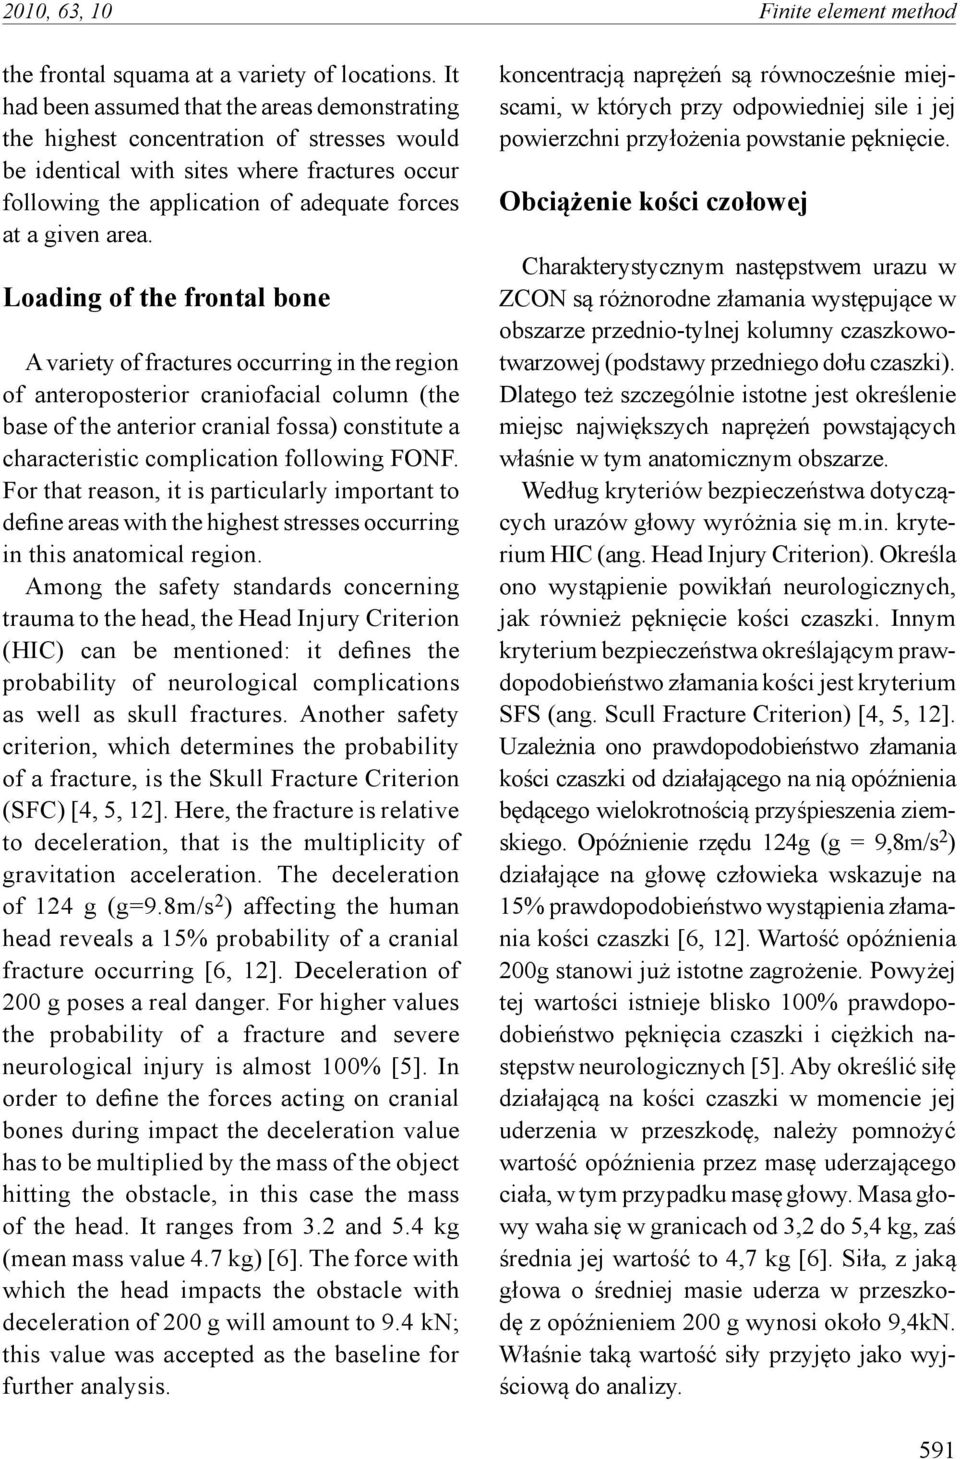 Loading of the frontal bone A variety of fractures occurring in the region of anteroposterior craniofacial column (the base of the anterior cranial fossa) constitute a characteristic complication